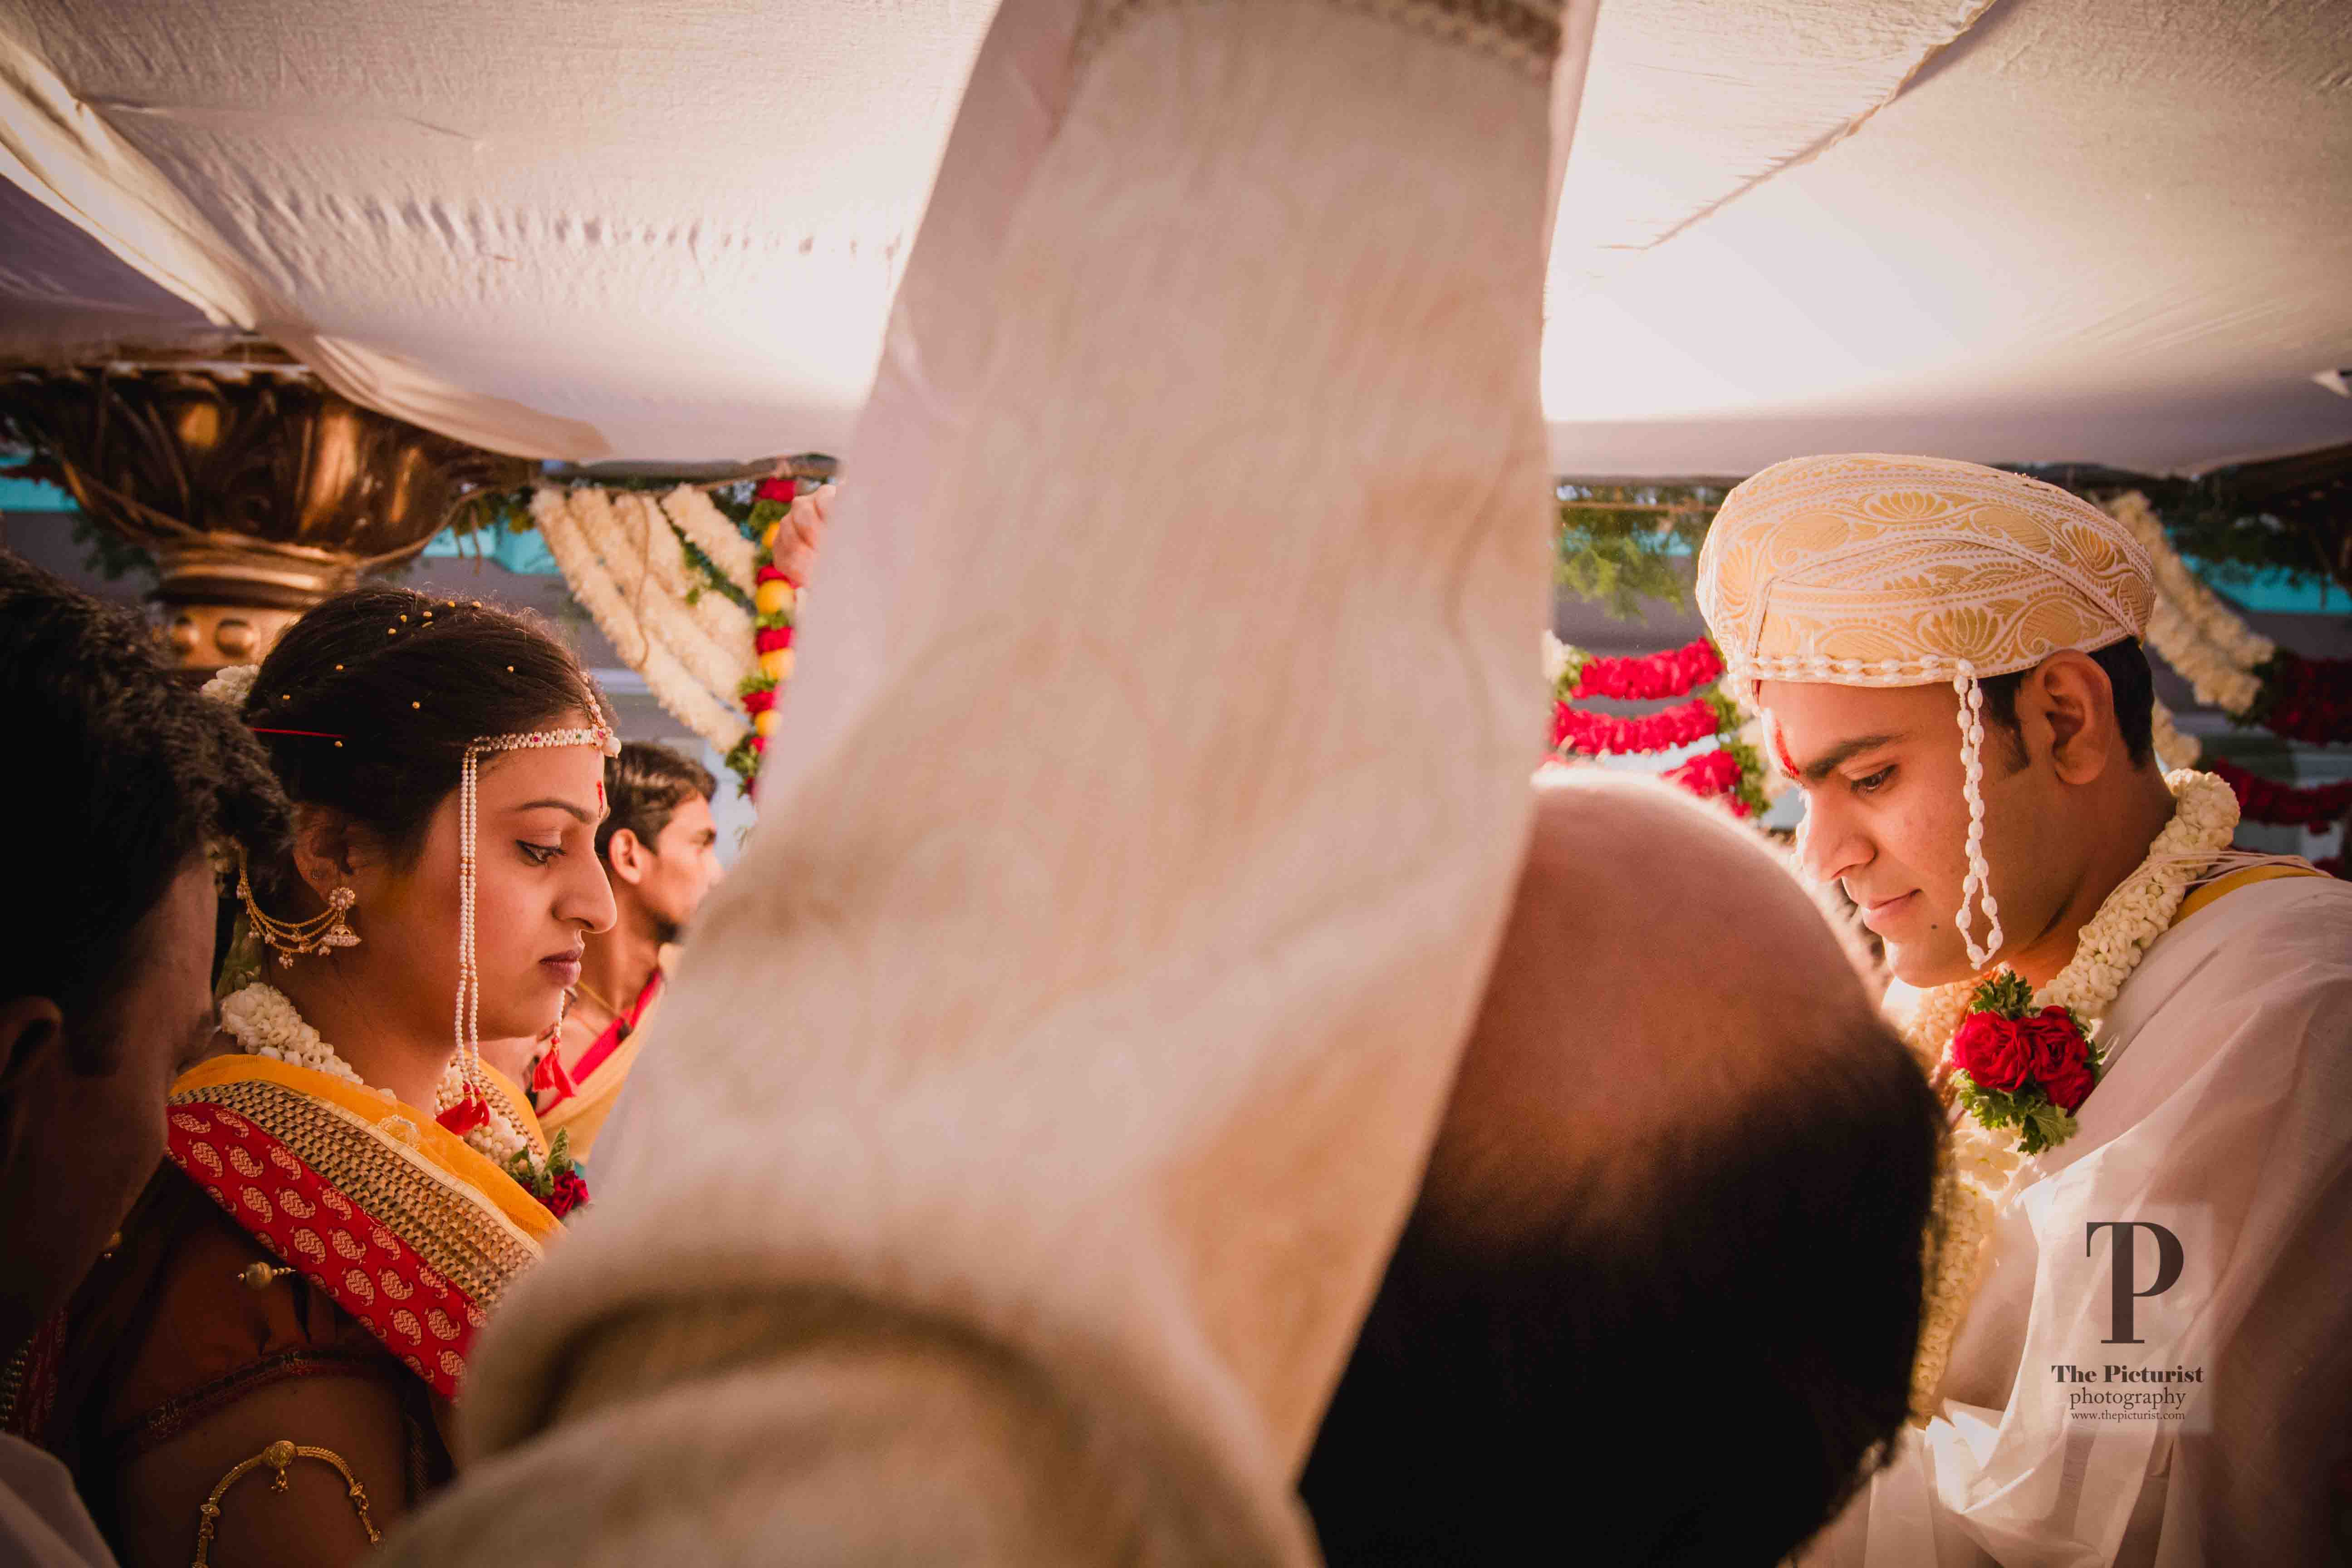 mithun and vaishnavi on opposite sides of the cloth before the wedding starts